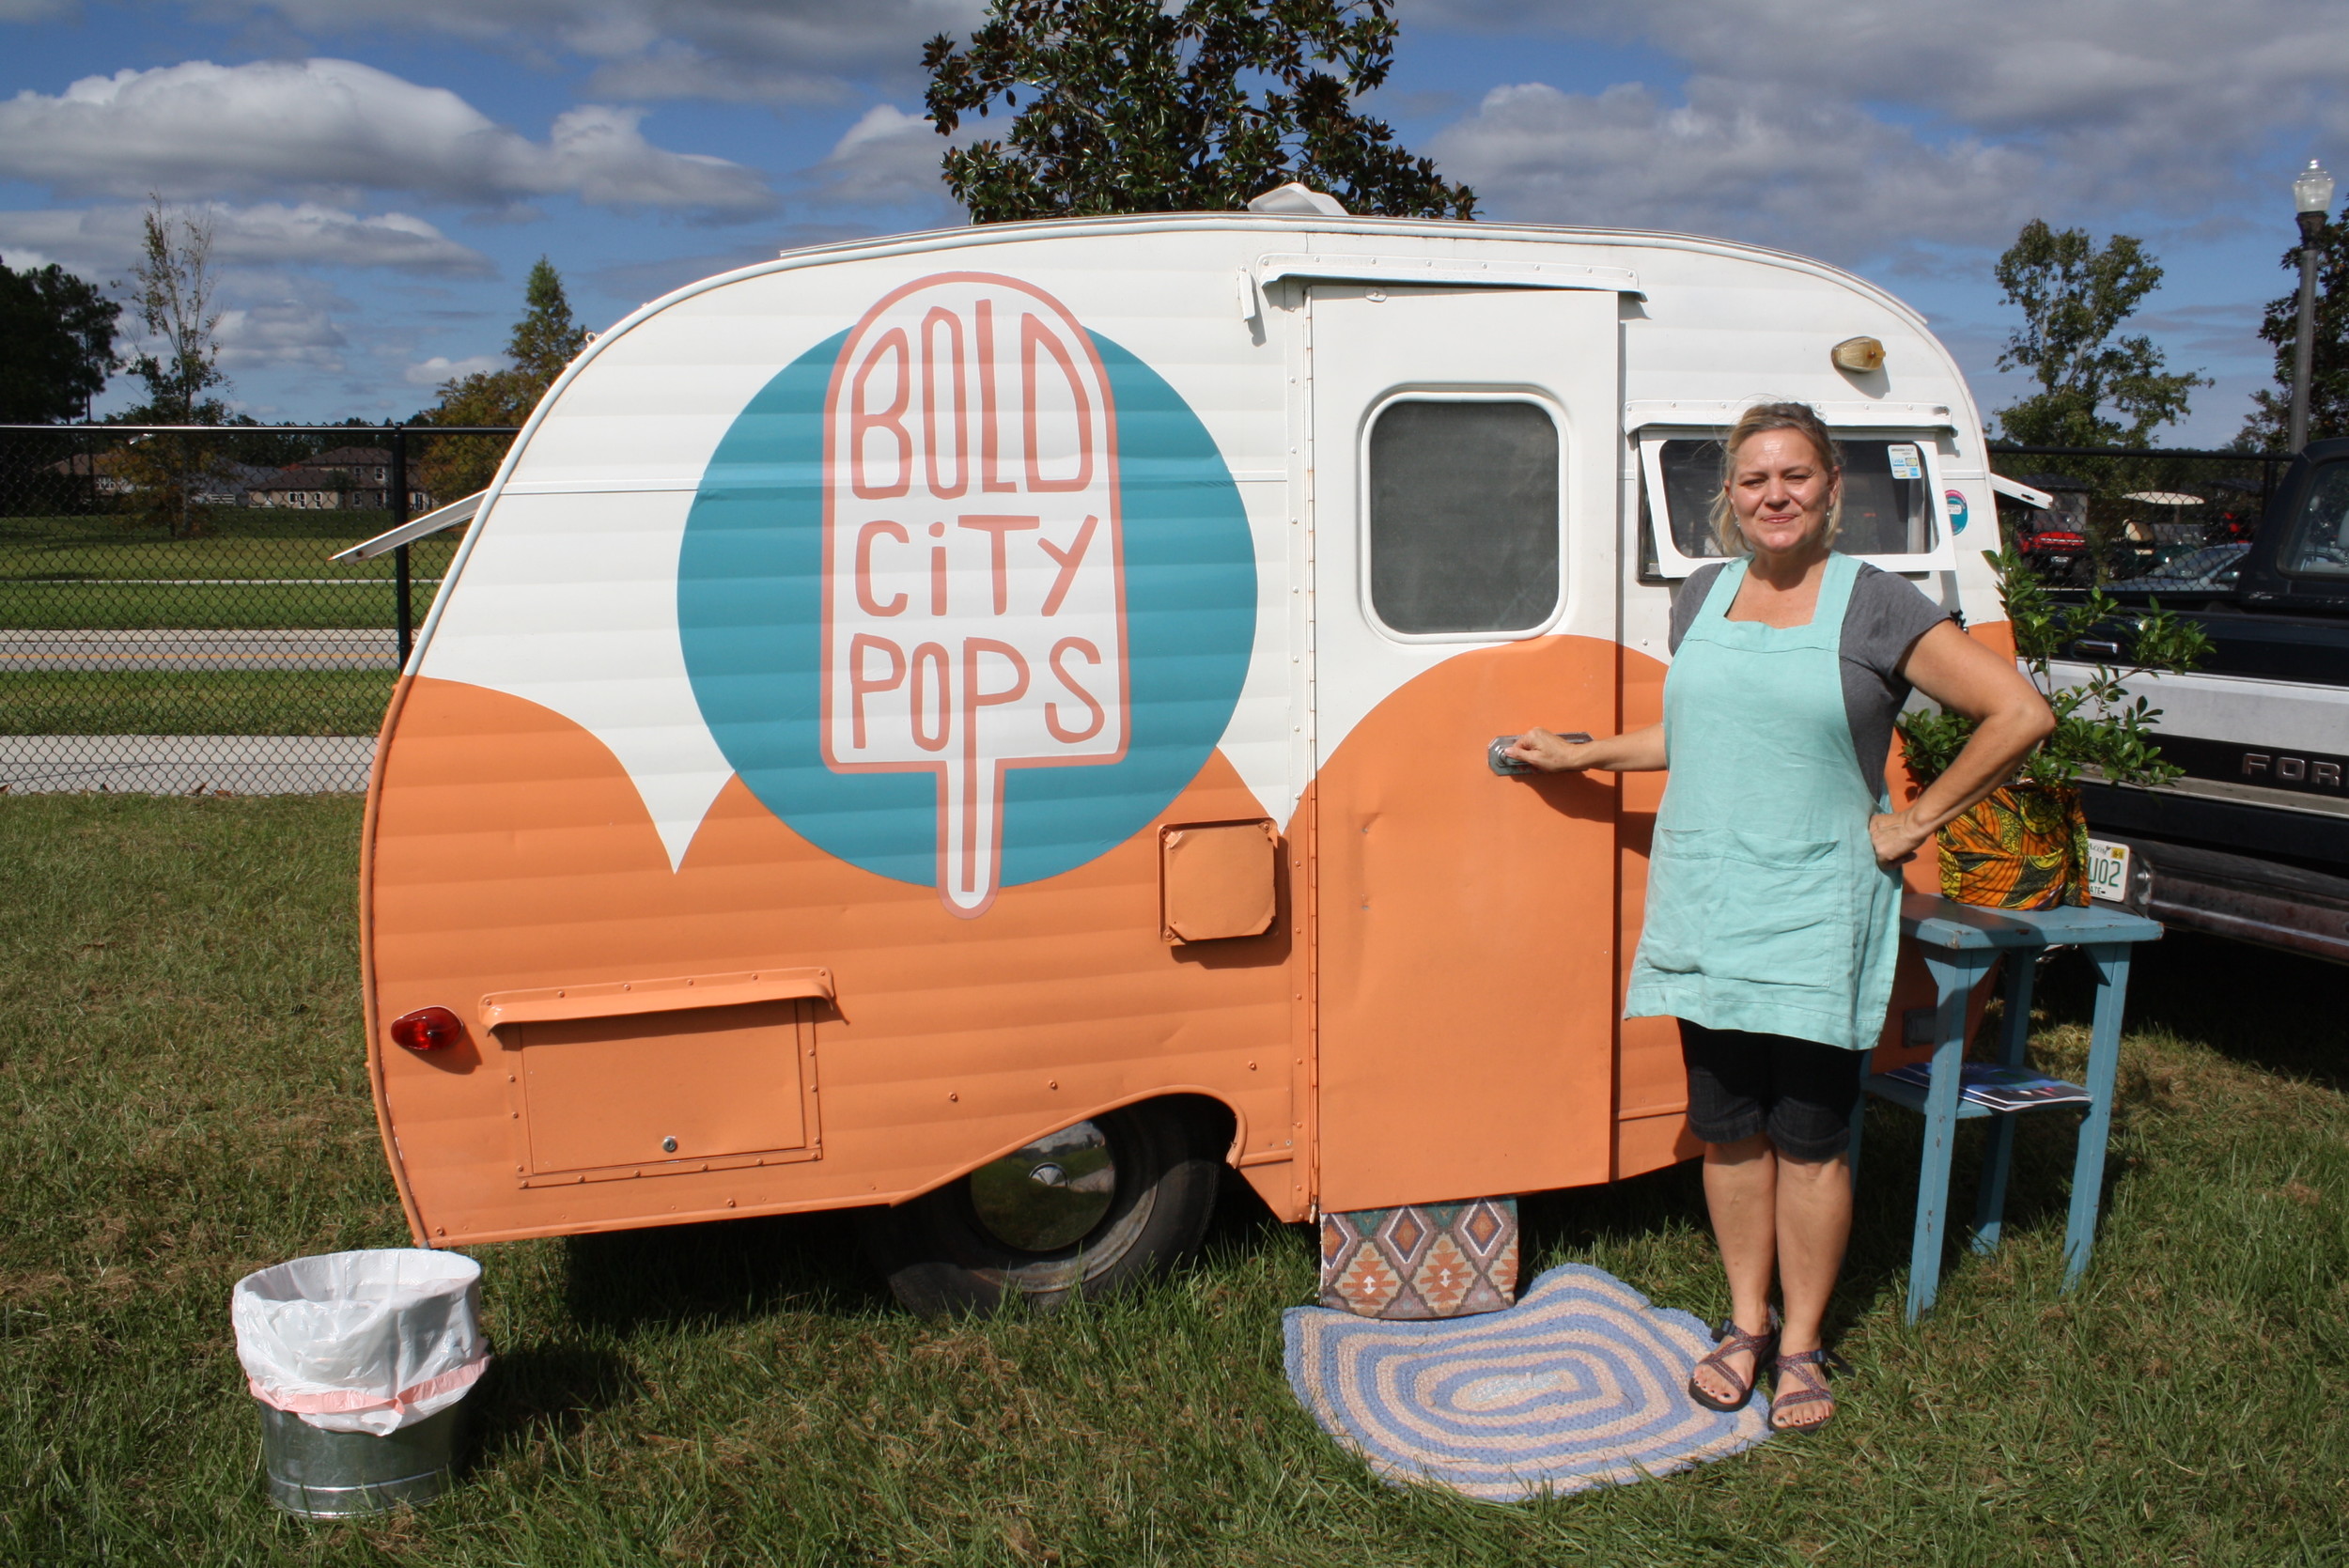 Rhonda Ryan of Bold City Pops was on hand as part of the food truck offerings at this year's festival. The vintage trailer was stocked with handmade popsicles.